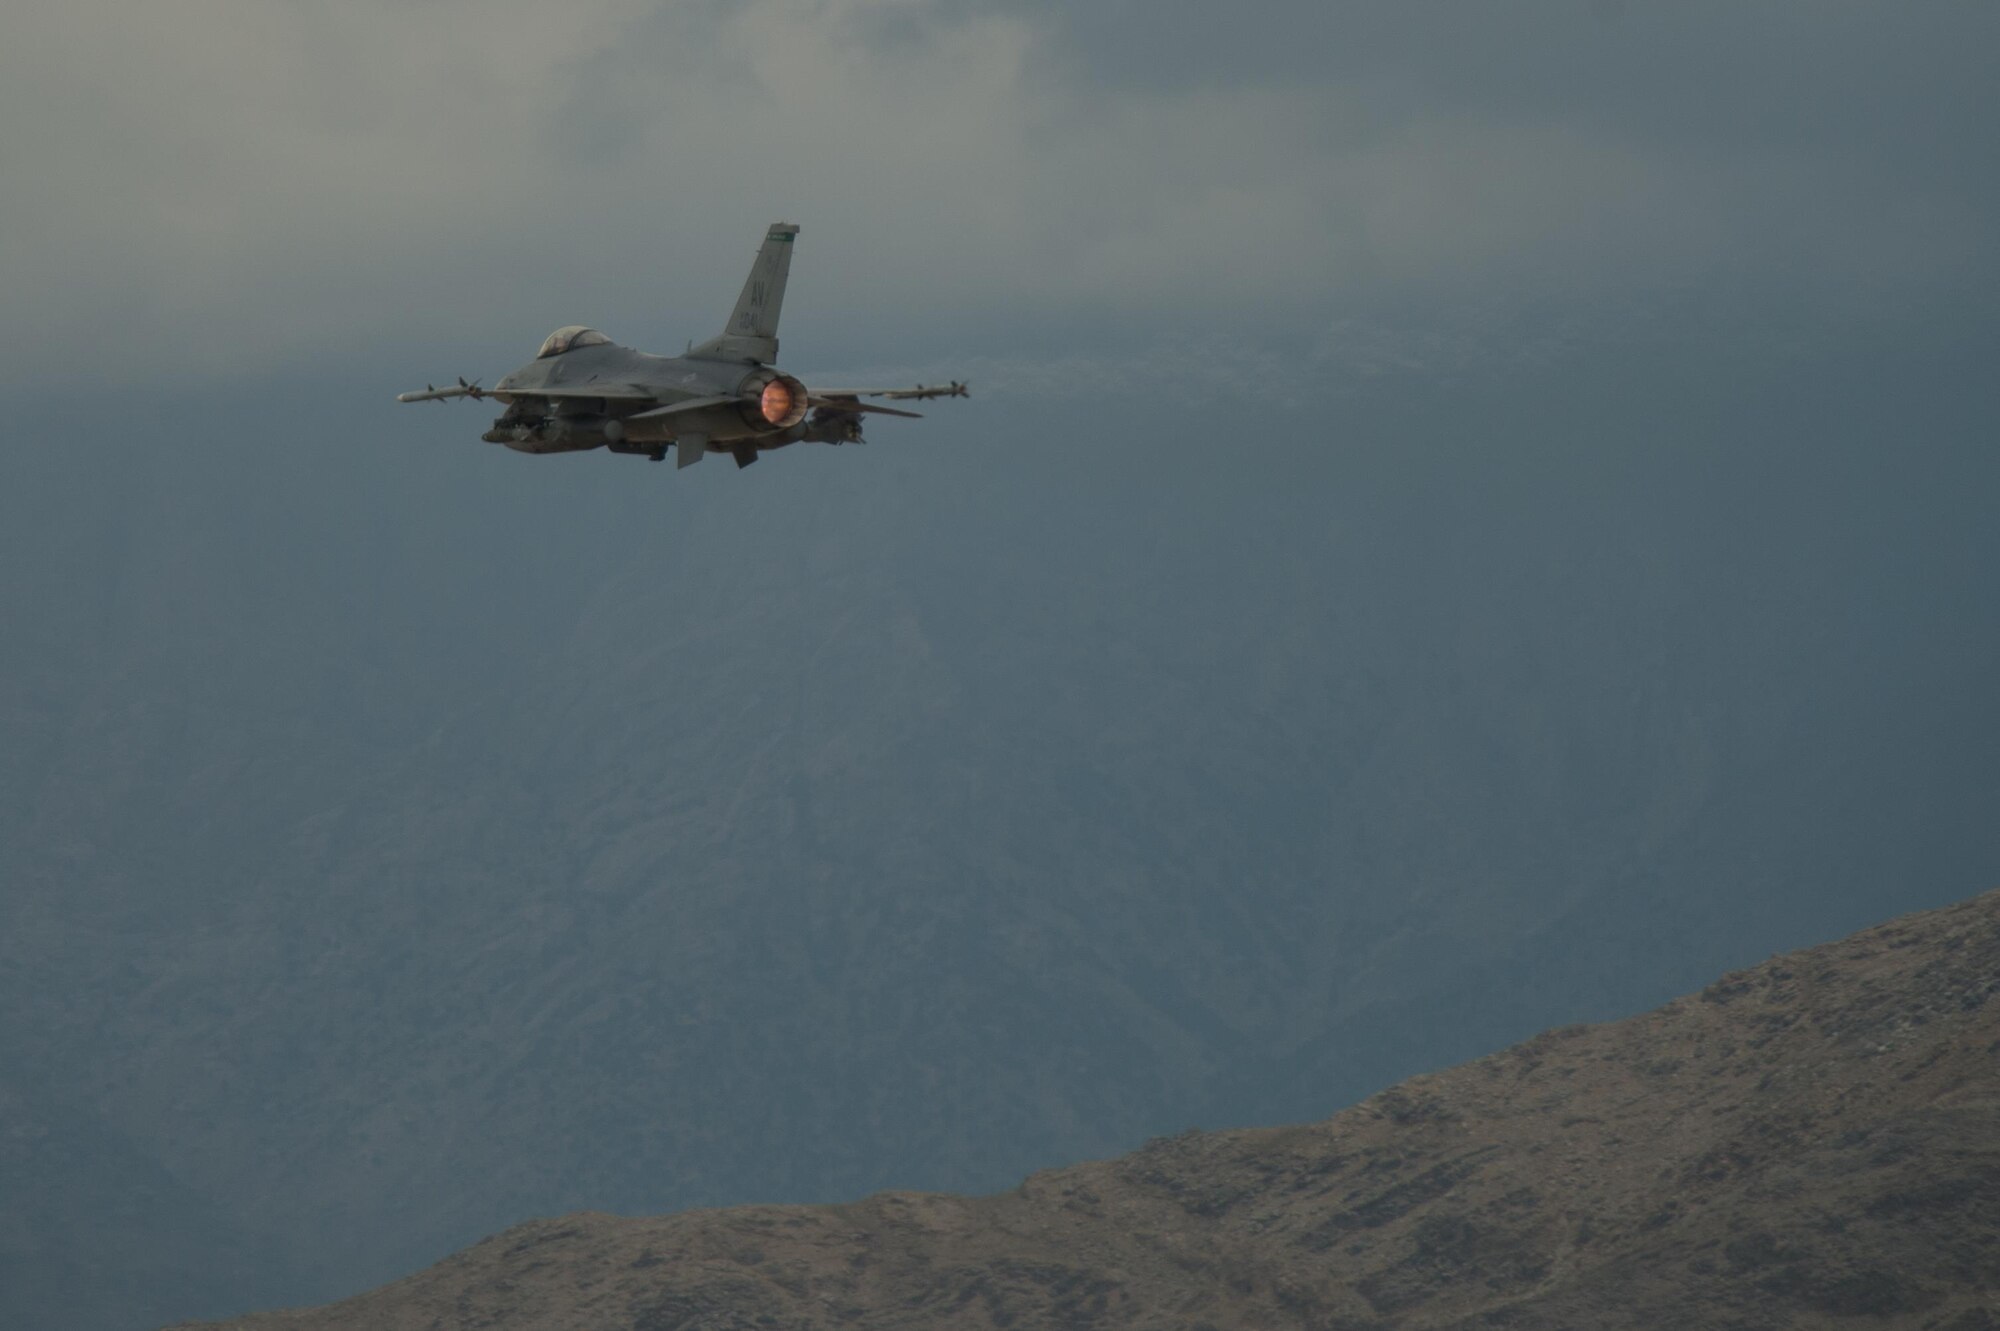 A U.S. Air Force F-16 Fighting Falcon “Triple Nickel” aircraft assigned to the 555th Expeditionary Fighter Squadron from Aviano Air Base, Italy, takes off from Bagram Airfield, Afghanistan, July 28, 2015. The F-16 is a multi-role fighter aircraft that is highly maneuverable and has proven itself in air-to-air and air-to-ground combat. Members of the Triple Nickel are deployed in support of Operation Freedom’s Sentinel and NATO’s Resolute Support mission. (U.S. Air Force photo by Tech. Sgt. Joseph Swafford/Released)